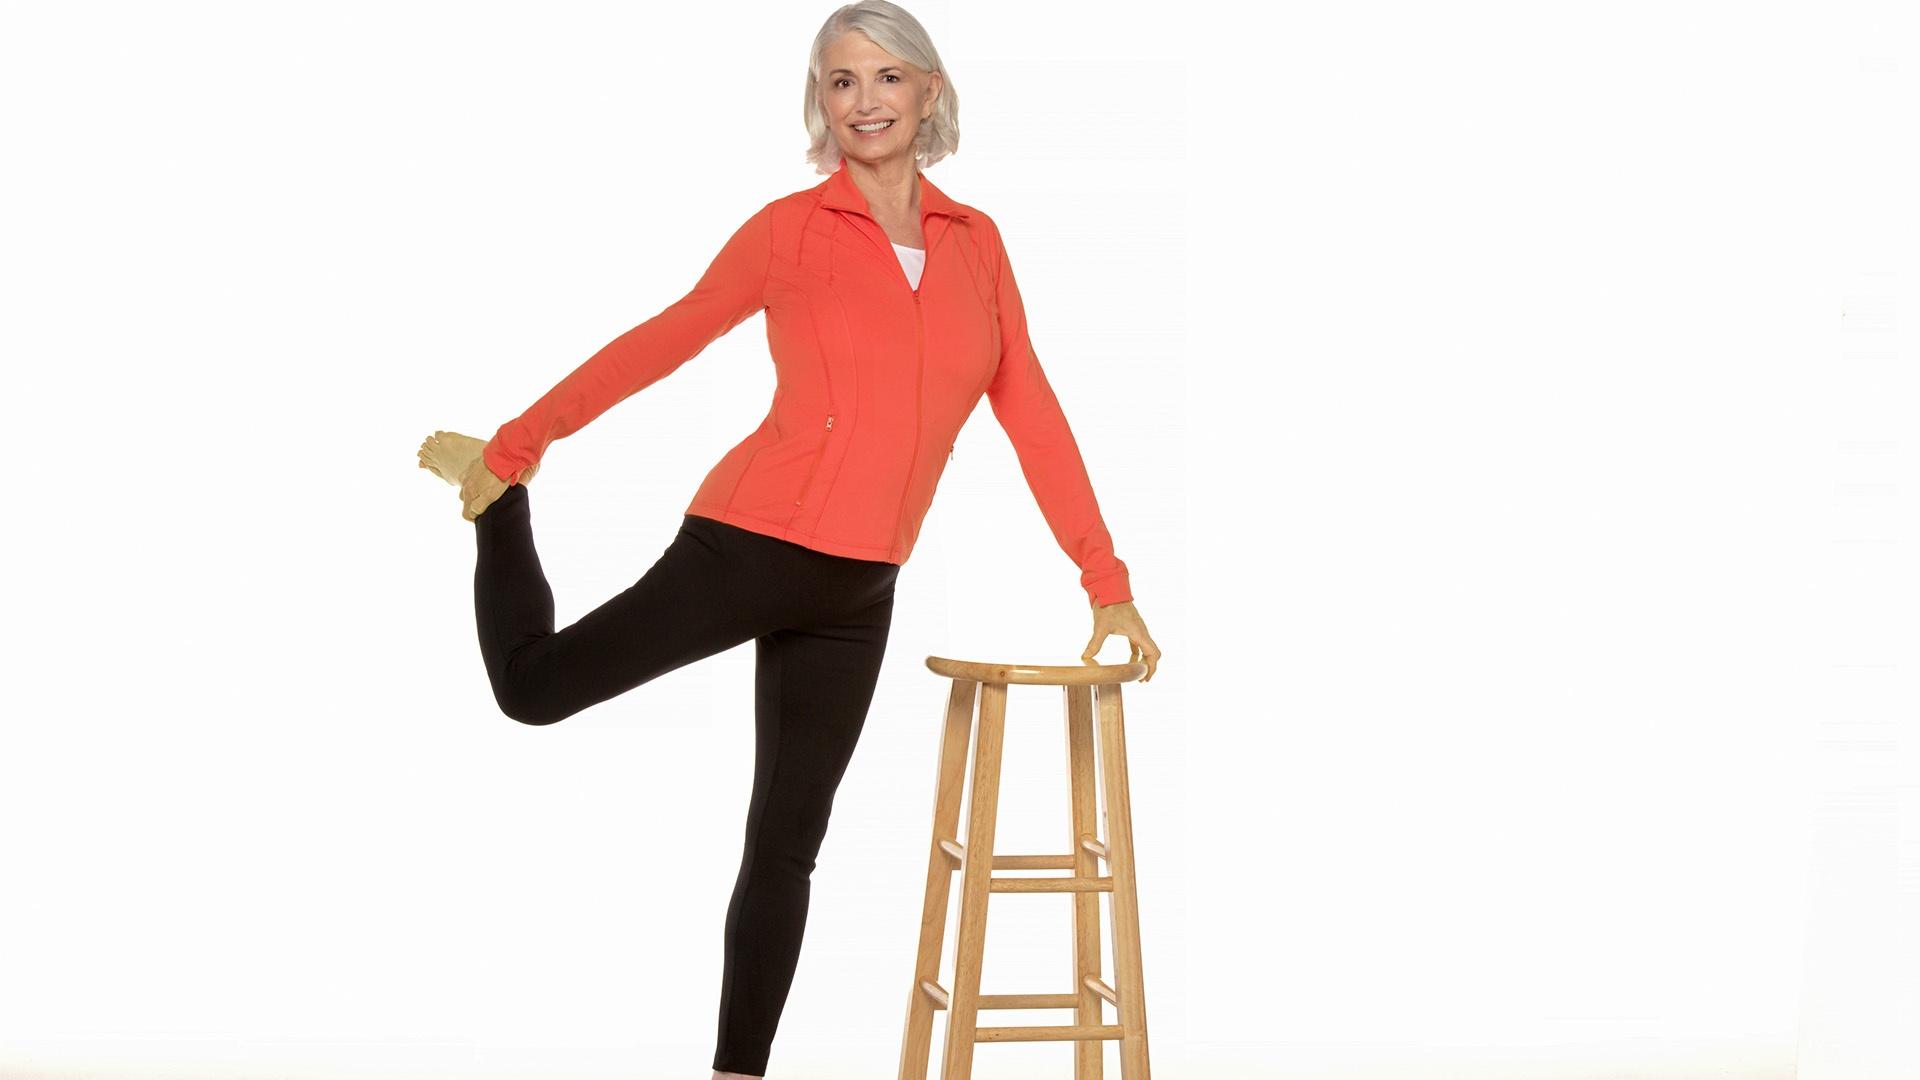 Easy Yoga: The Secret to Strength and Balance With Peggy Cappy